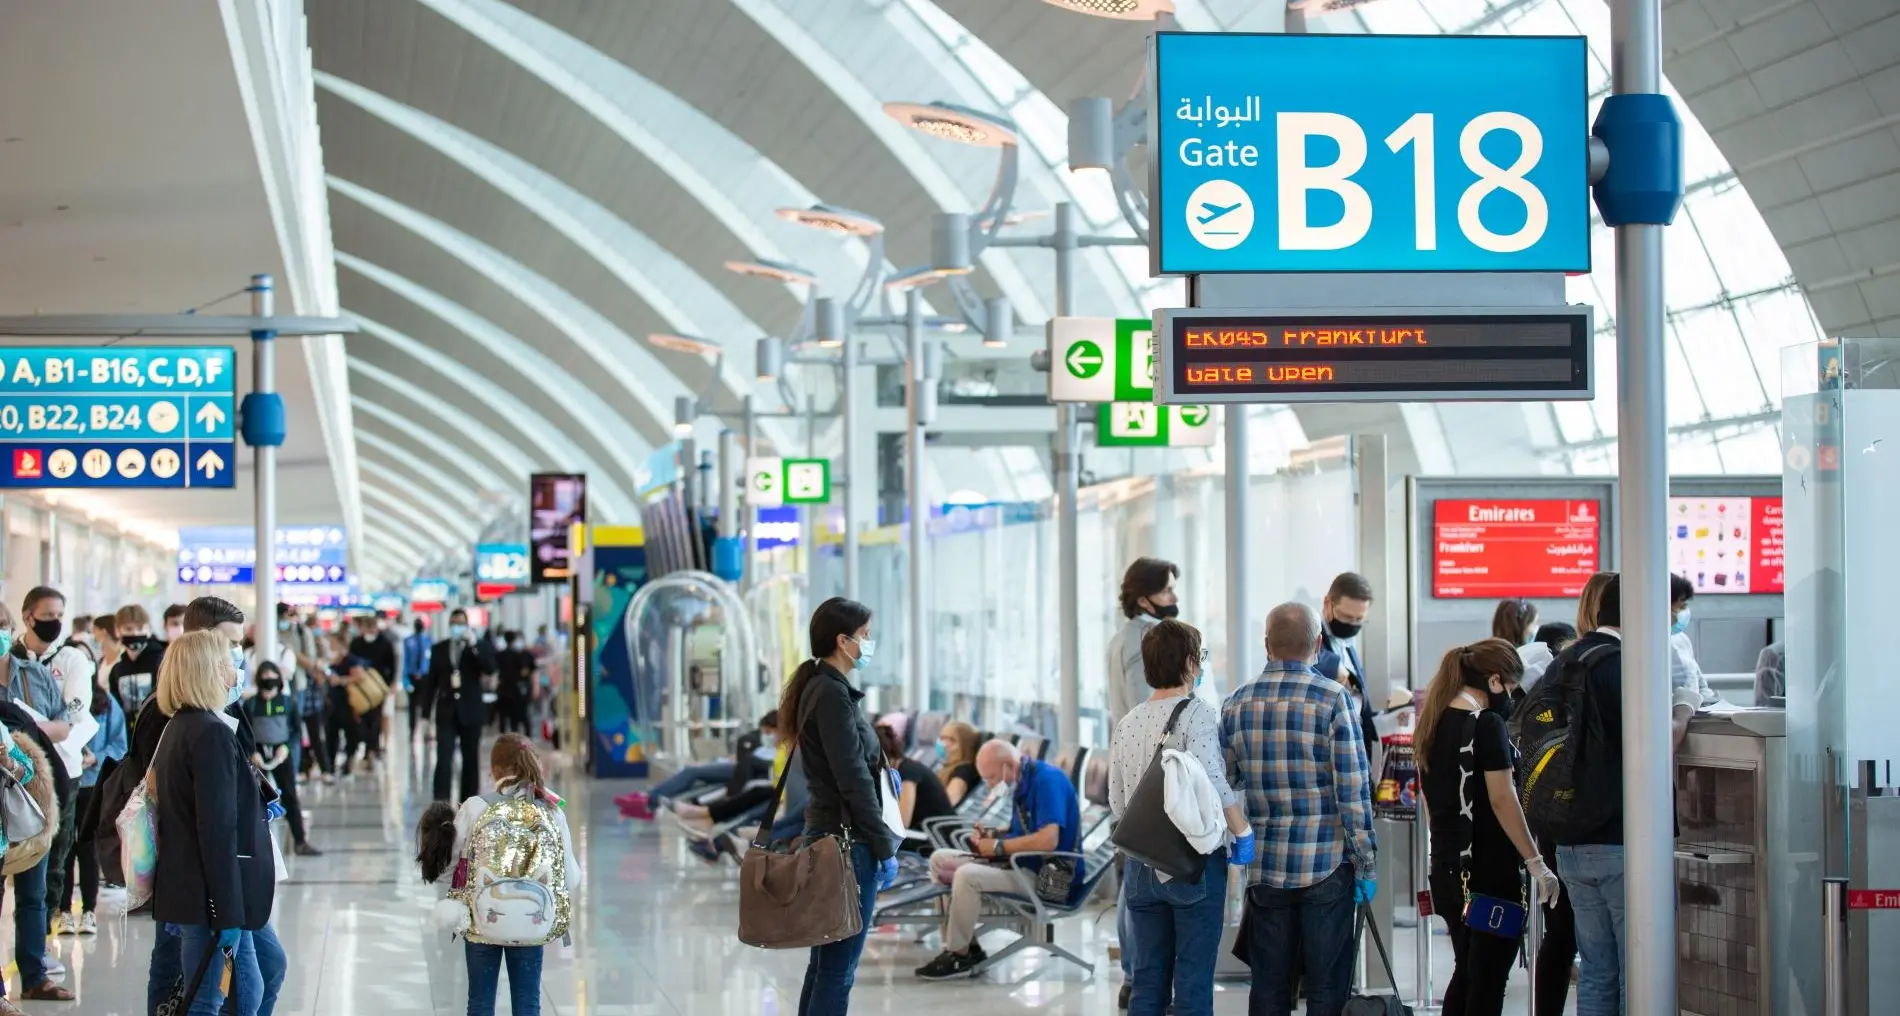 Eid Al Fitr break: DXB to see surge in passenger traffic; here's how you can beat the rush